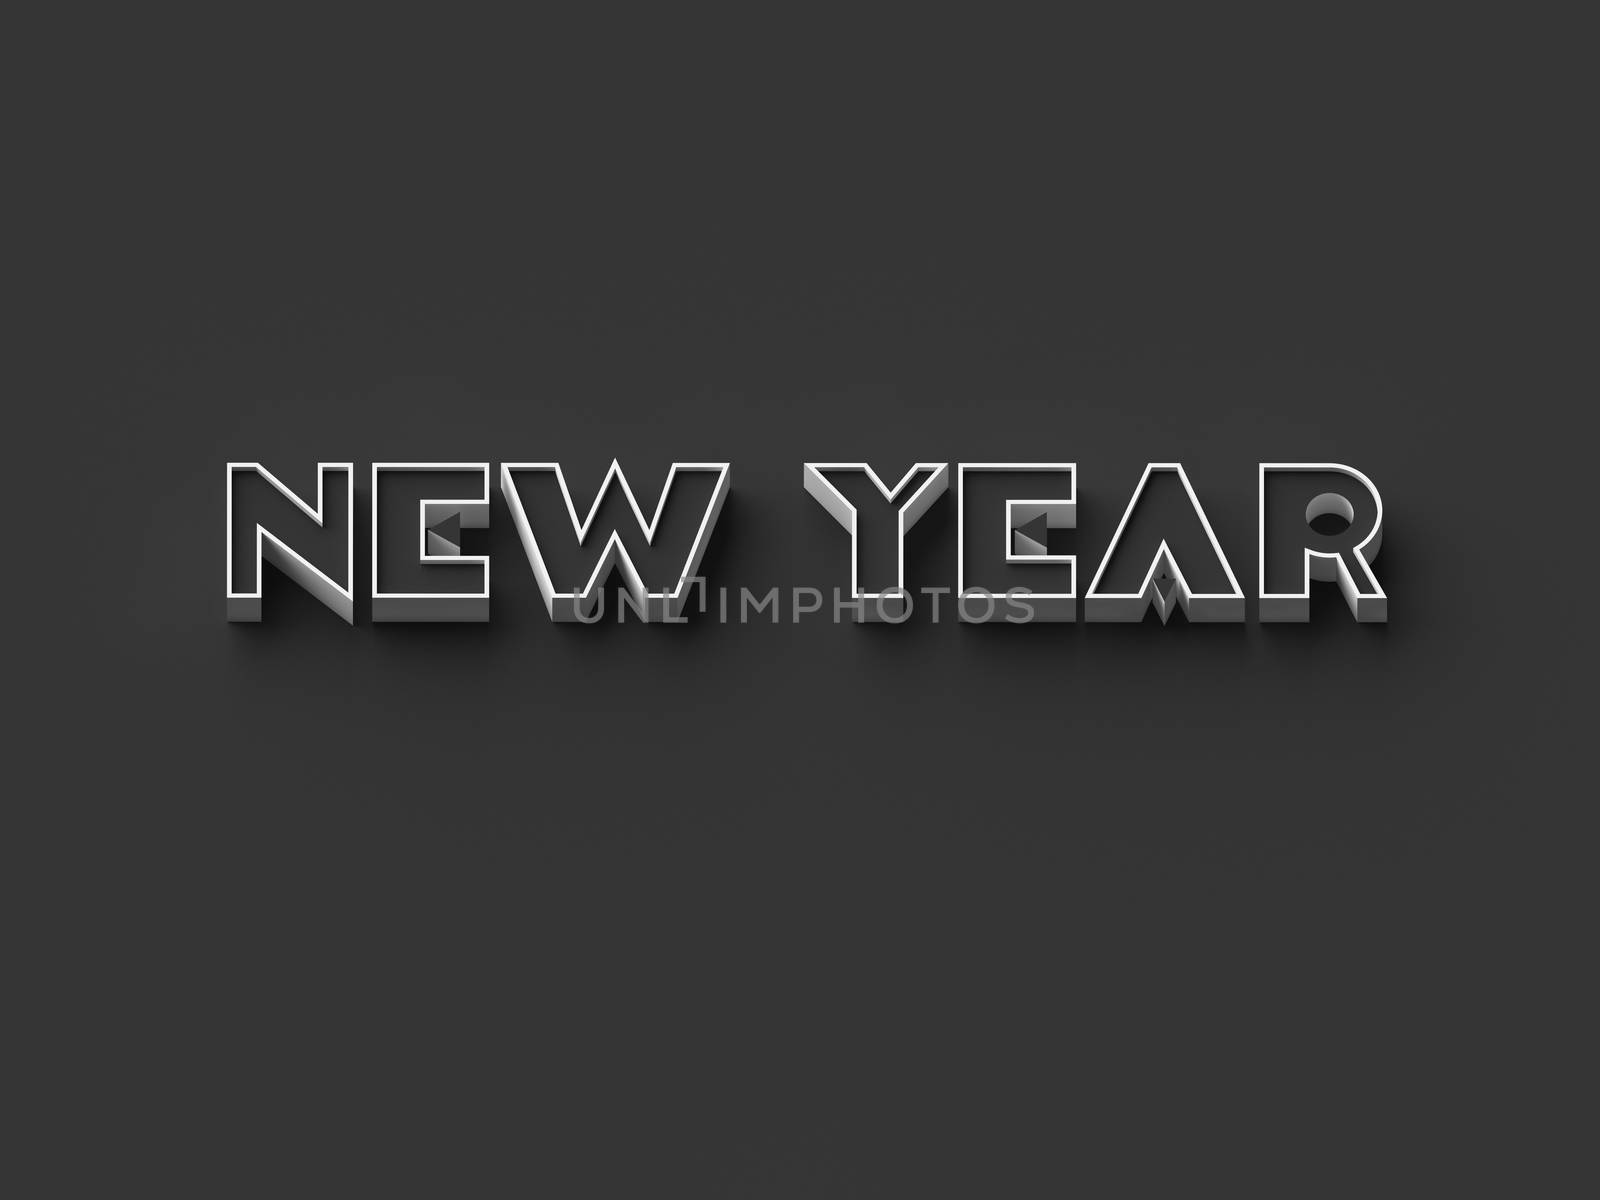 3D RENDERING WORDS 'NEW YEAR' by PrettyTG